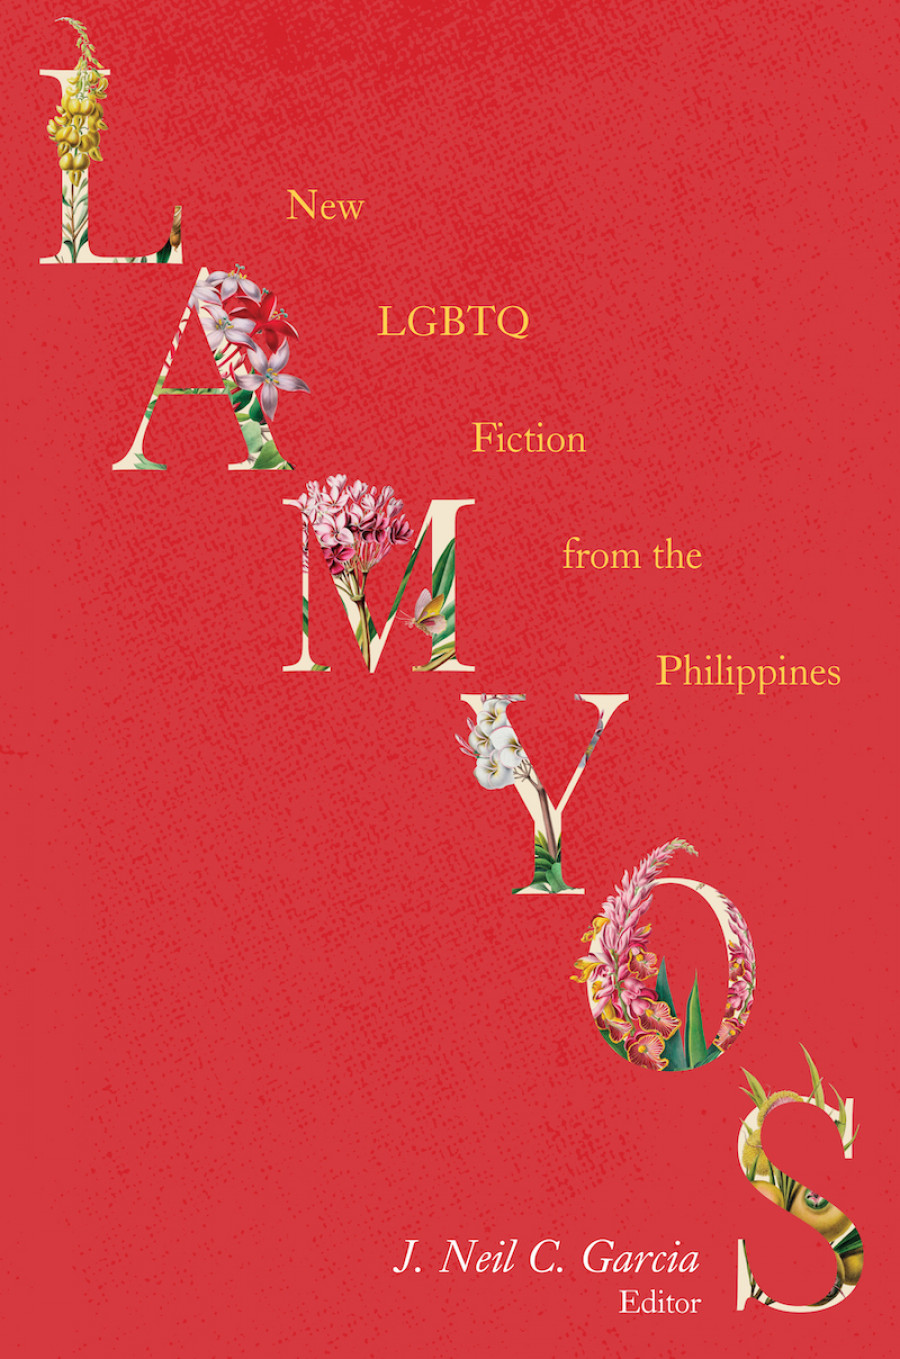 Lamyos new LGBTQ fiction from the Philippines